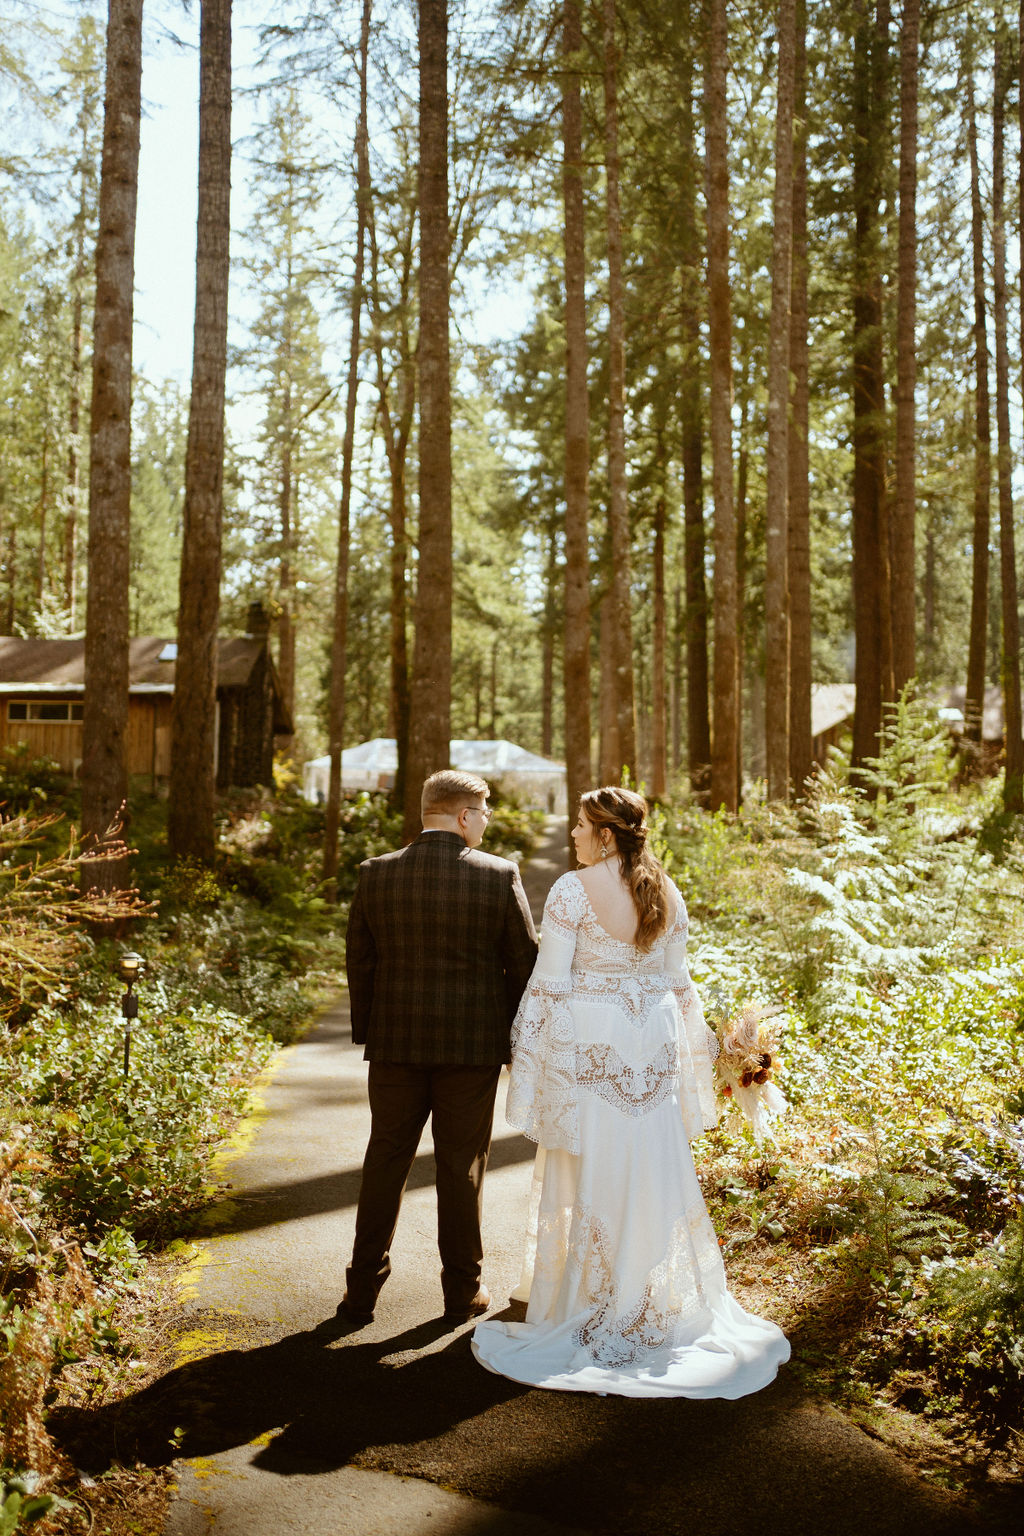 The bride and groom are holding hands walking down the road in the middle of the woods